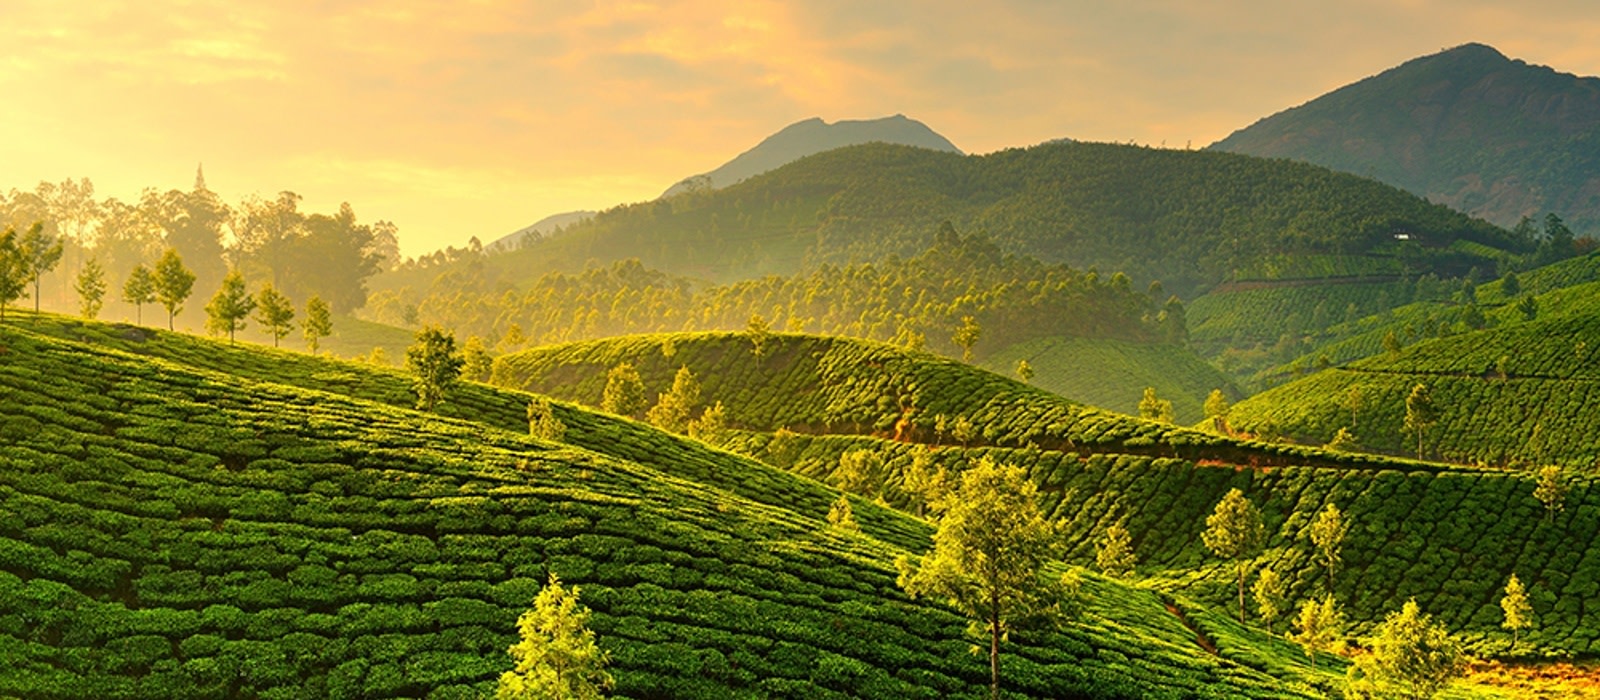 Kerala Tour Packages For Family